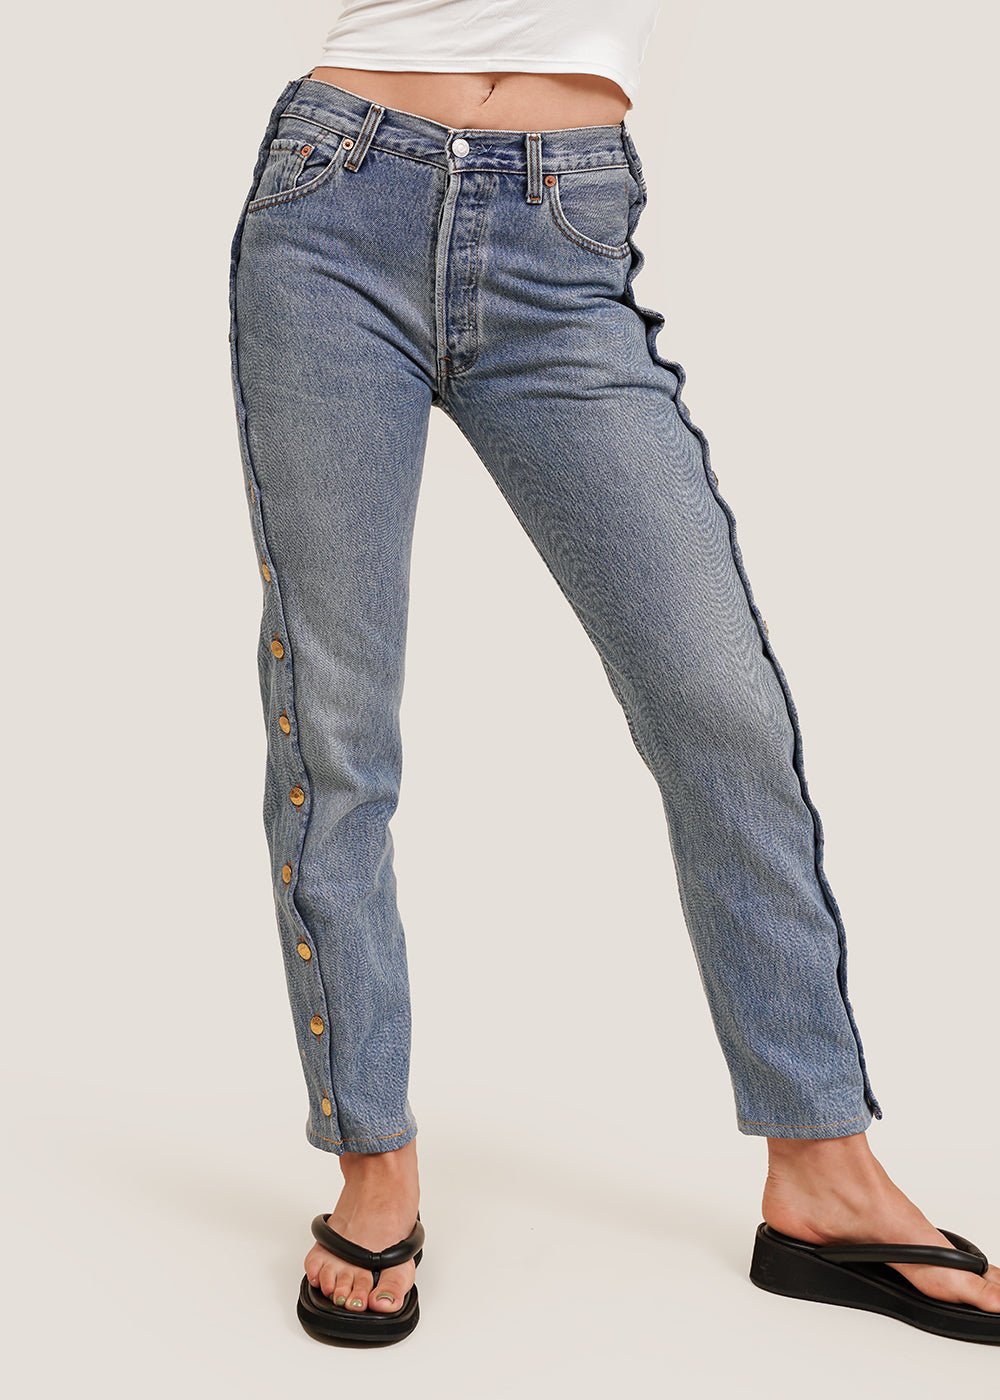 Paris RE Made Vintage Side Buttons Jeans - New Classics Studios Sustainable Ethical Fashion Canada